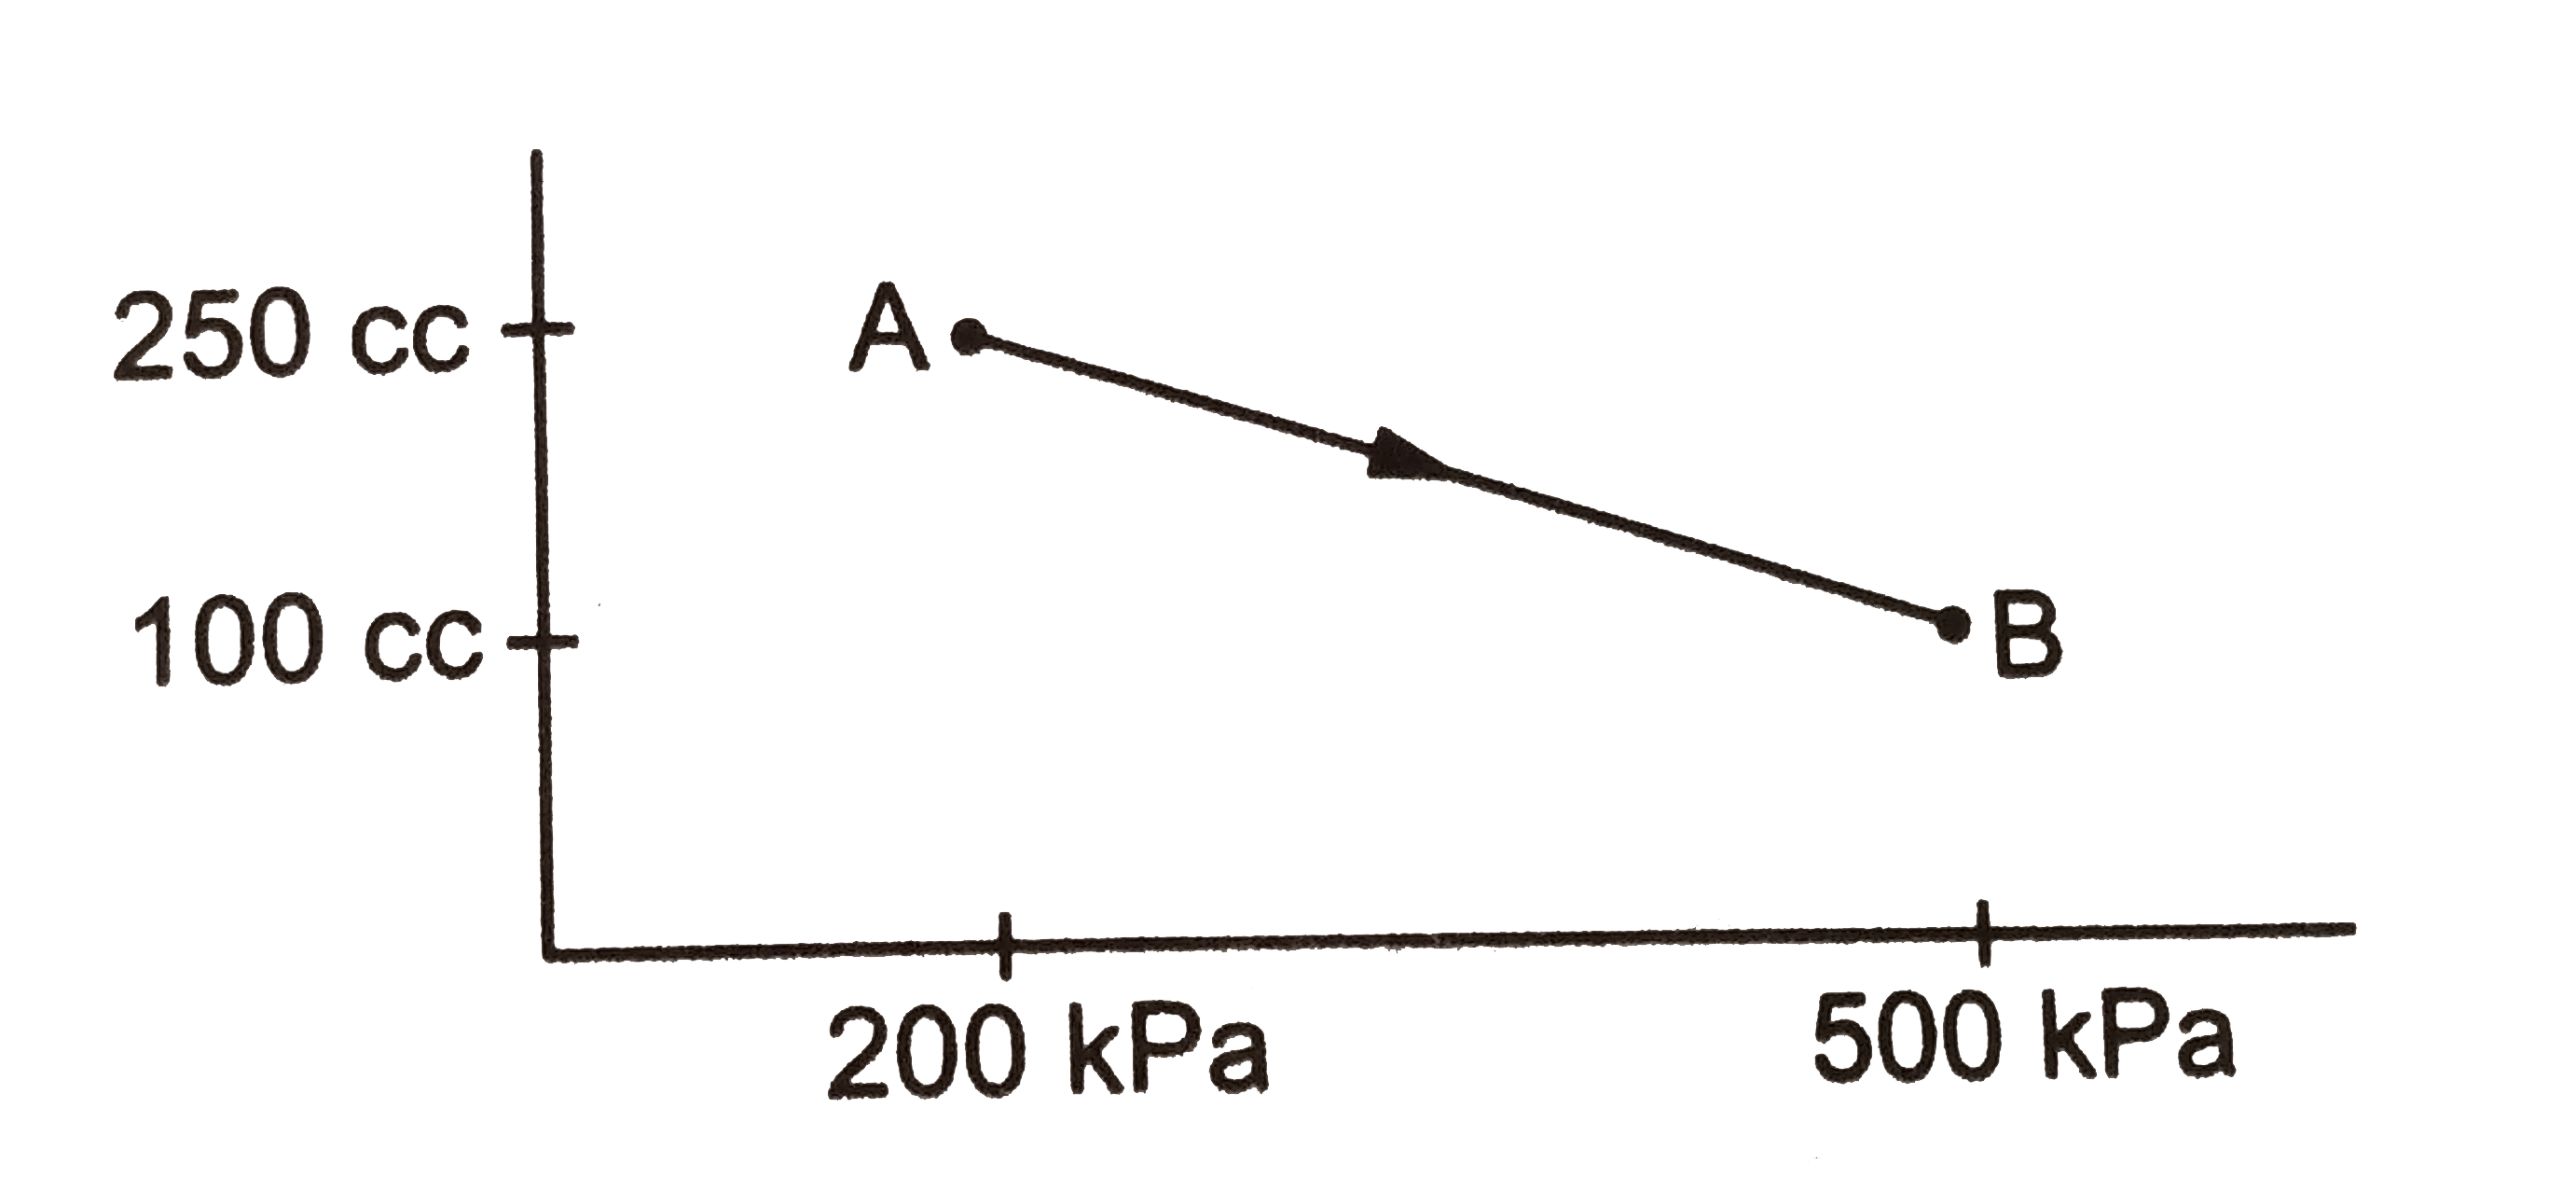 A gas is taken along the path AB as shown in fig, if 70 cal of heat is extracted from the gas in the process, calculate the change in the internal energy of the system.